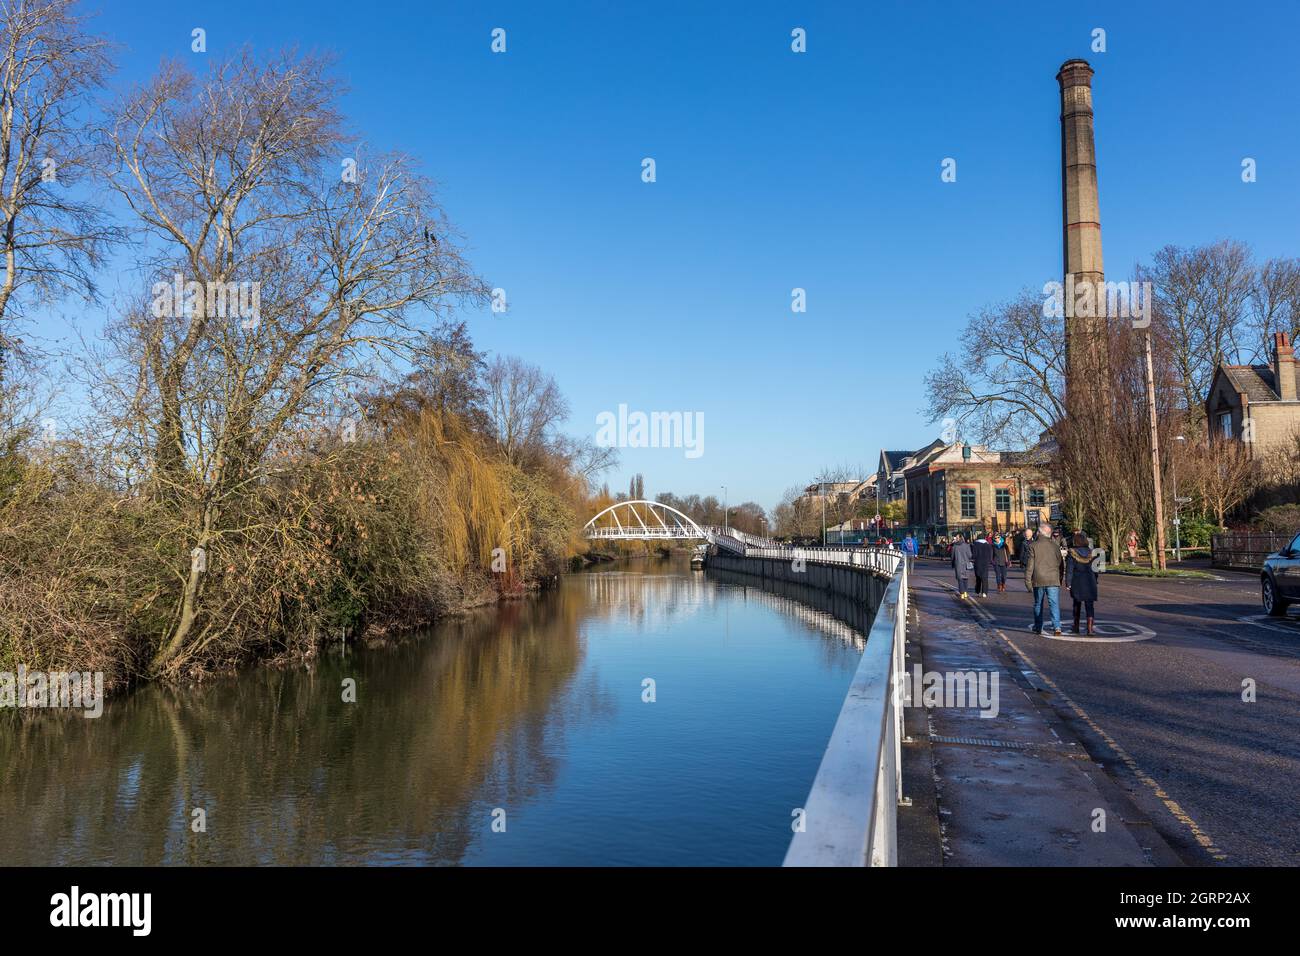 View of calm river cam with white feet bridge and the large old chimney part of the Pumping Station at the Cambridge Museum of Technology on Riverside Stock Photo